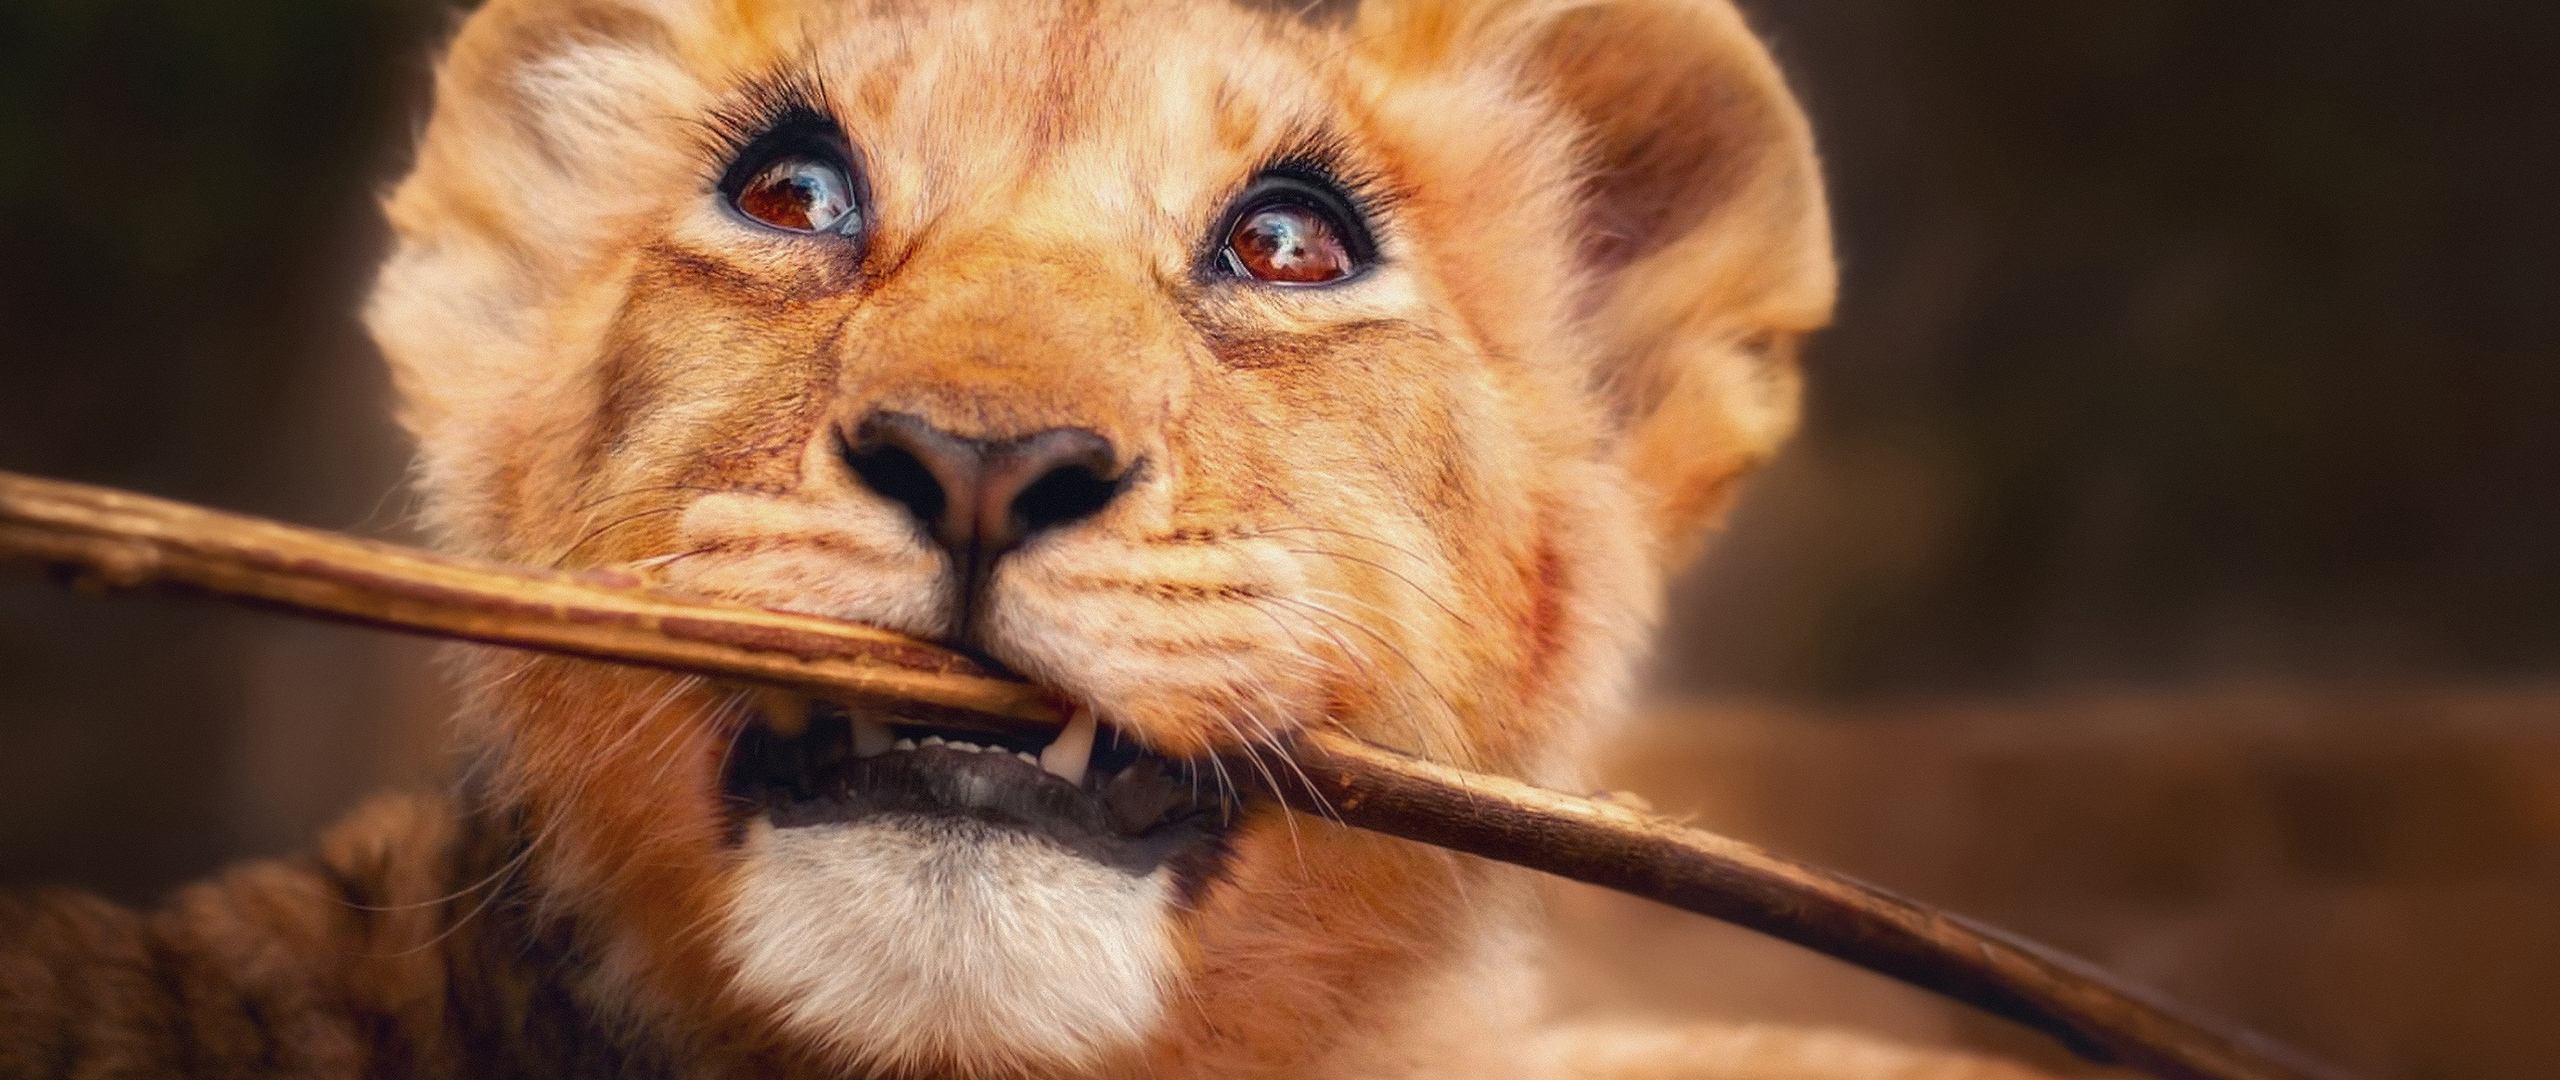 lion-with-stick-in-mouth-4k-d1-2560x1080.jpg